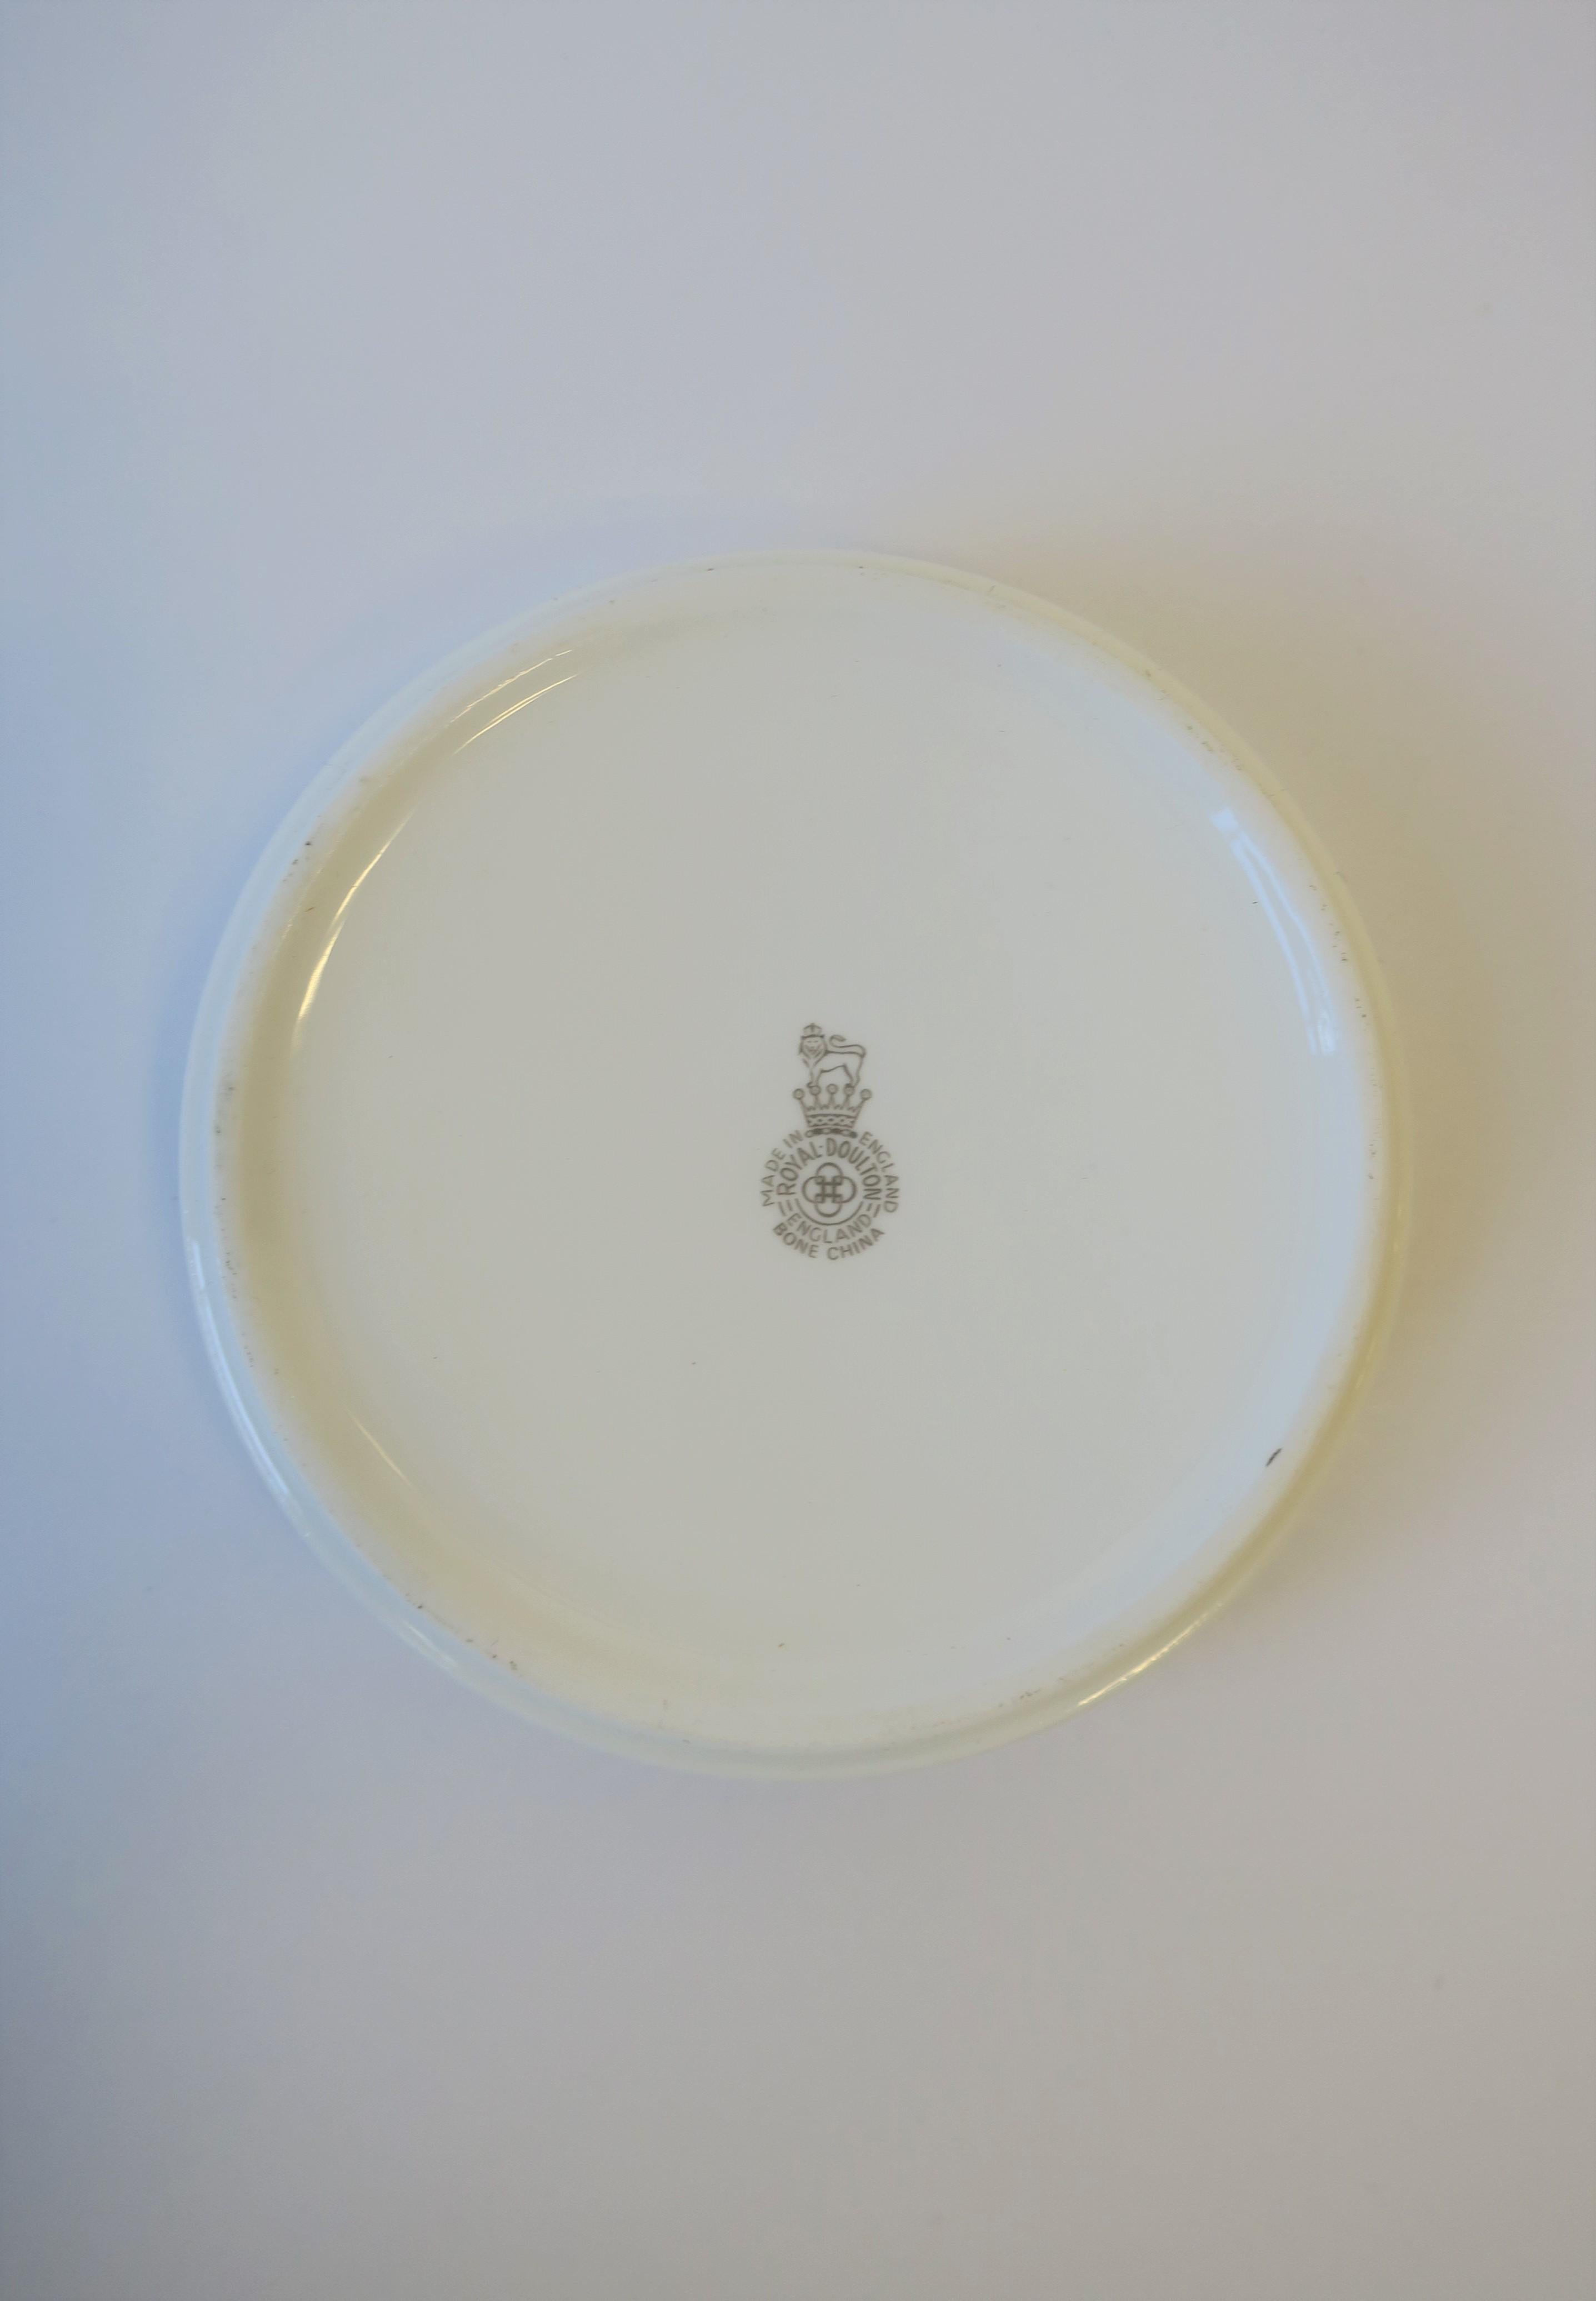 The Ritz Hotel London Blue and White Porcelain Jewelry Dish by Royal Doulton 6